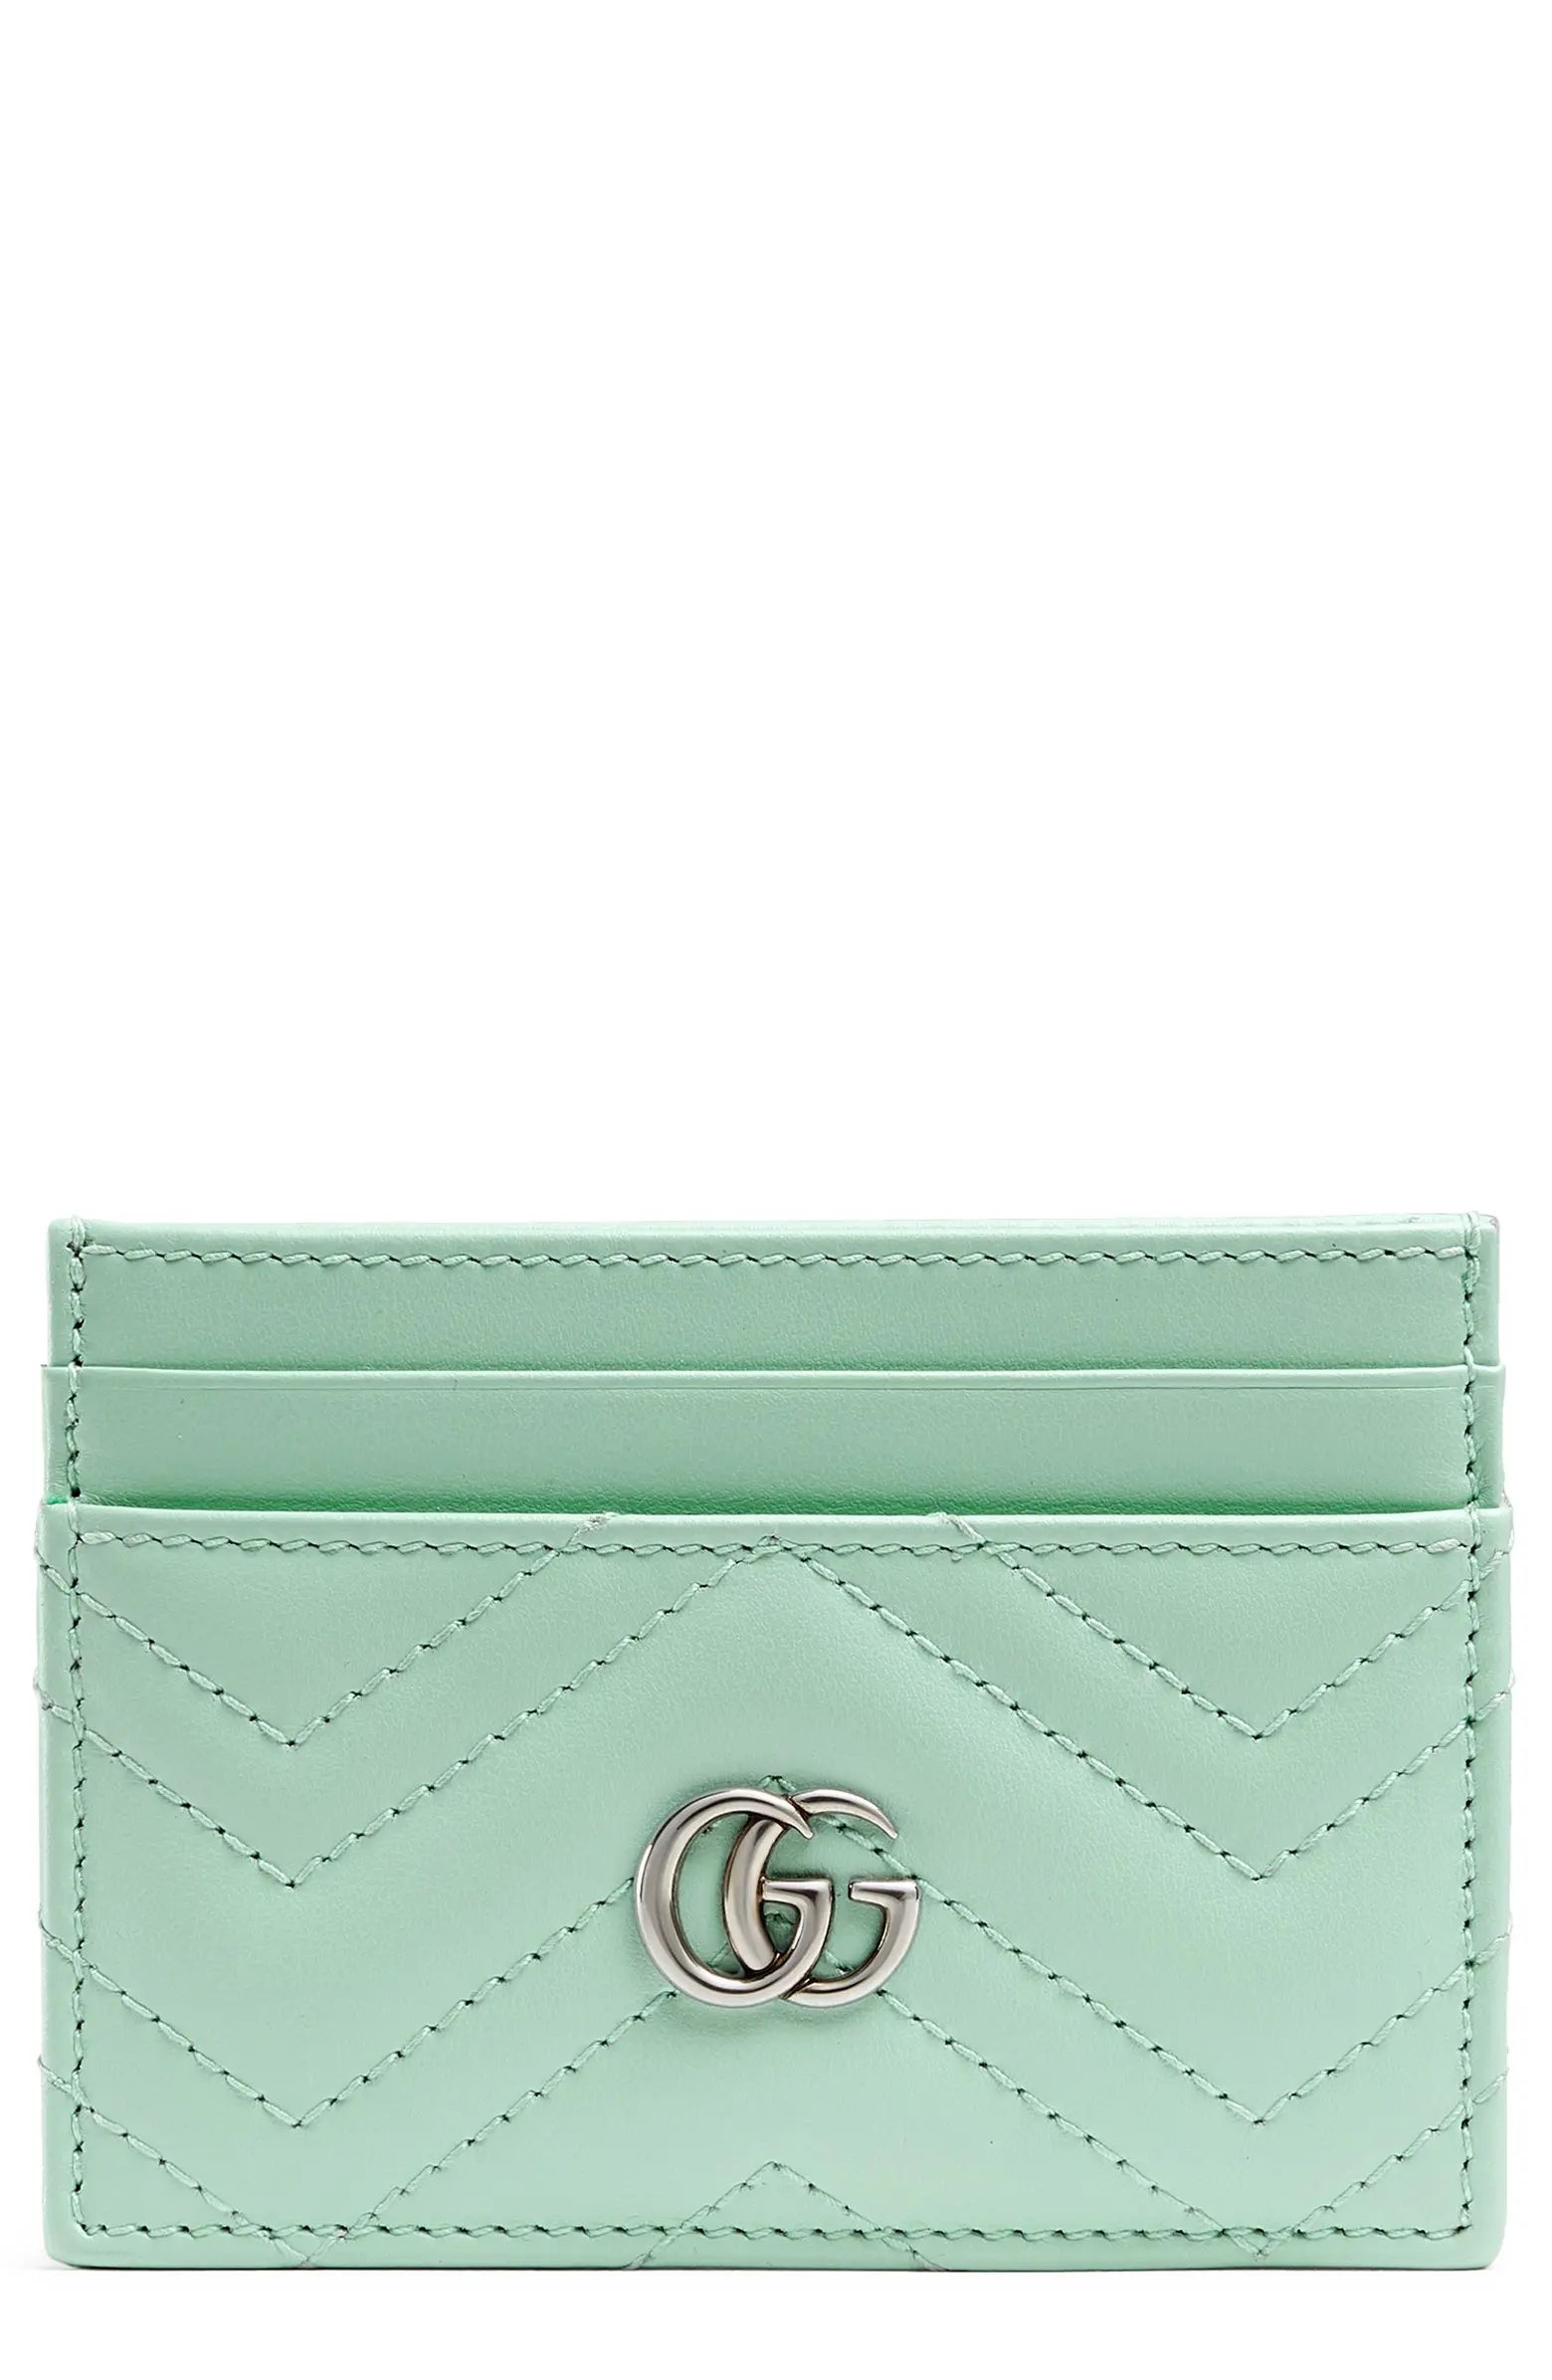 GG Quilted Leather Card Case | Nordstrom